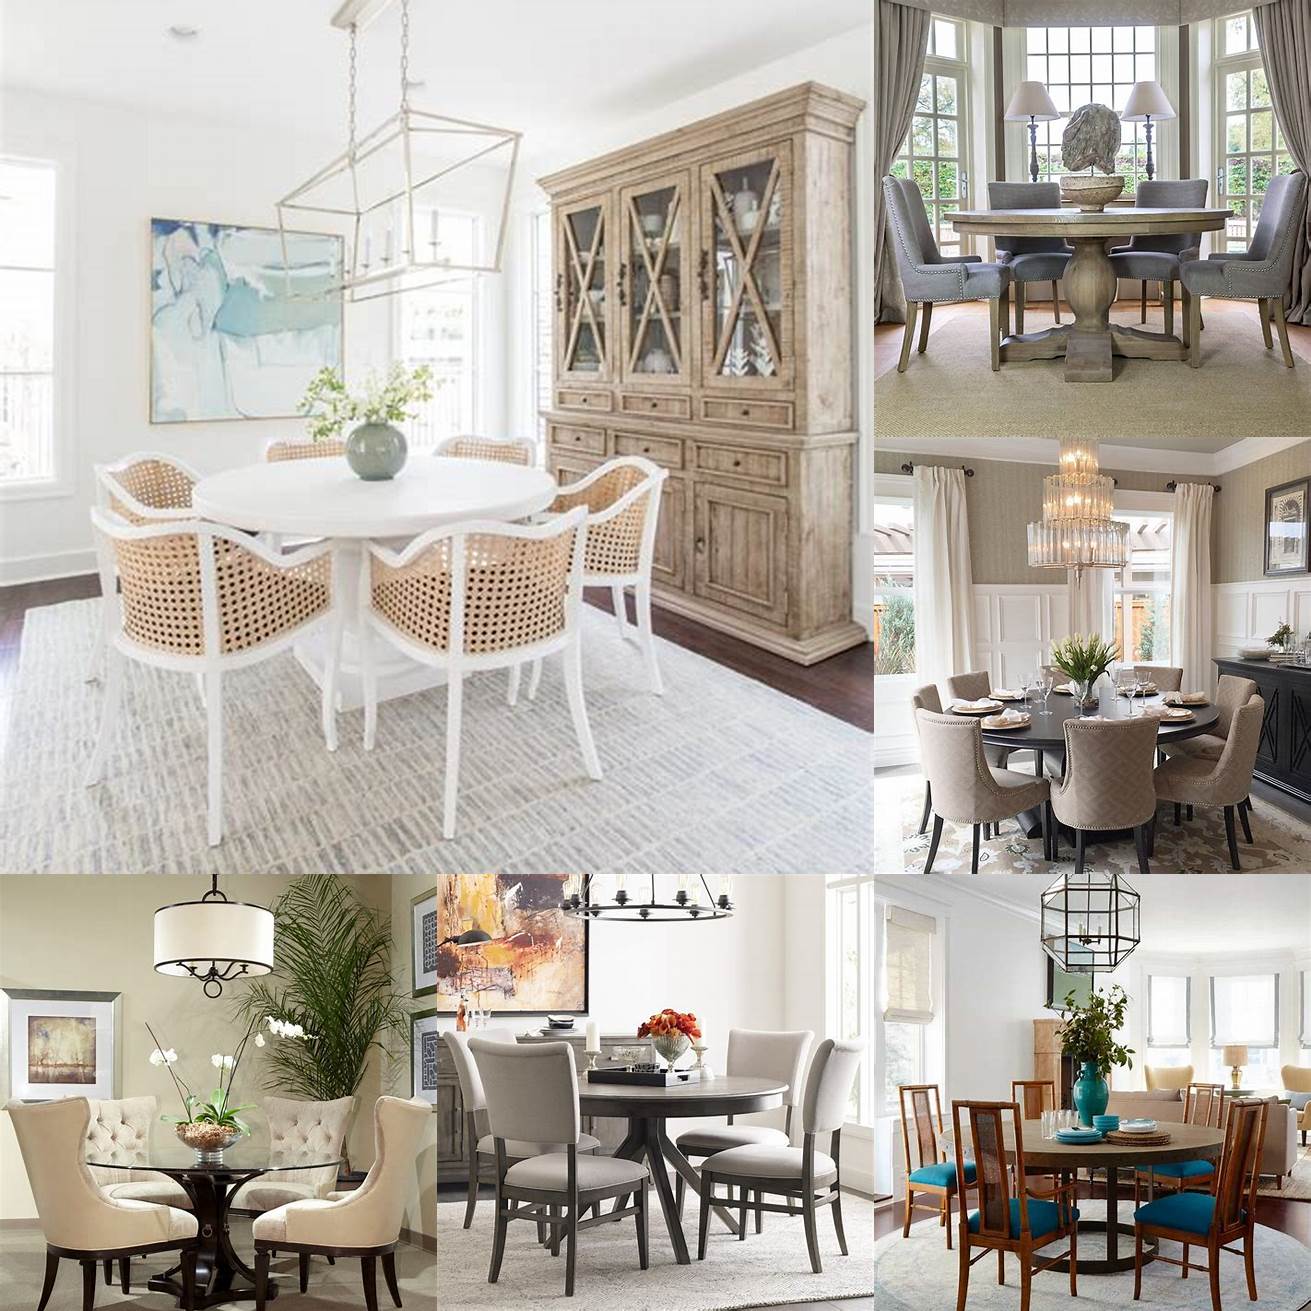 A bright and airy dining room with a round table